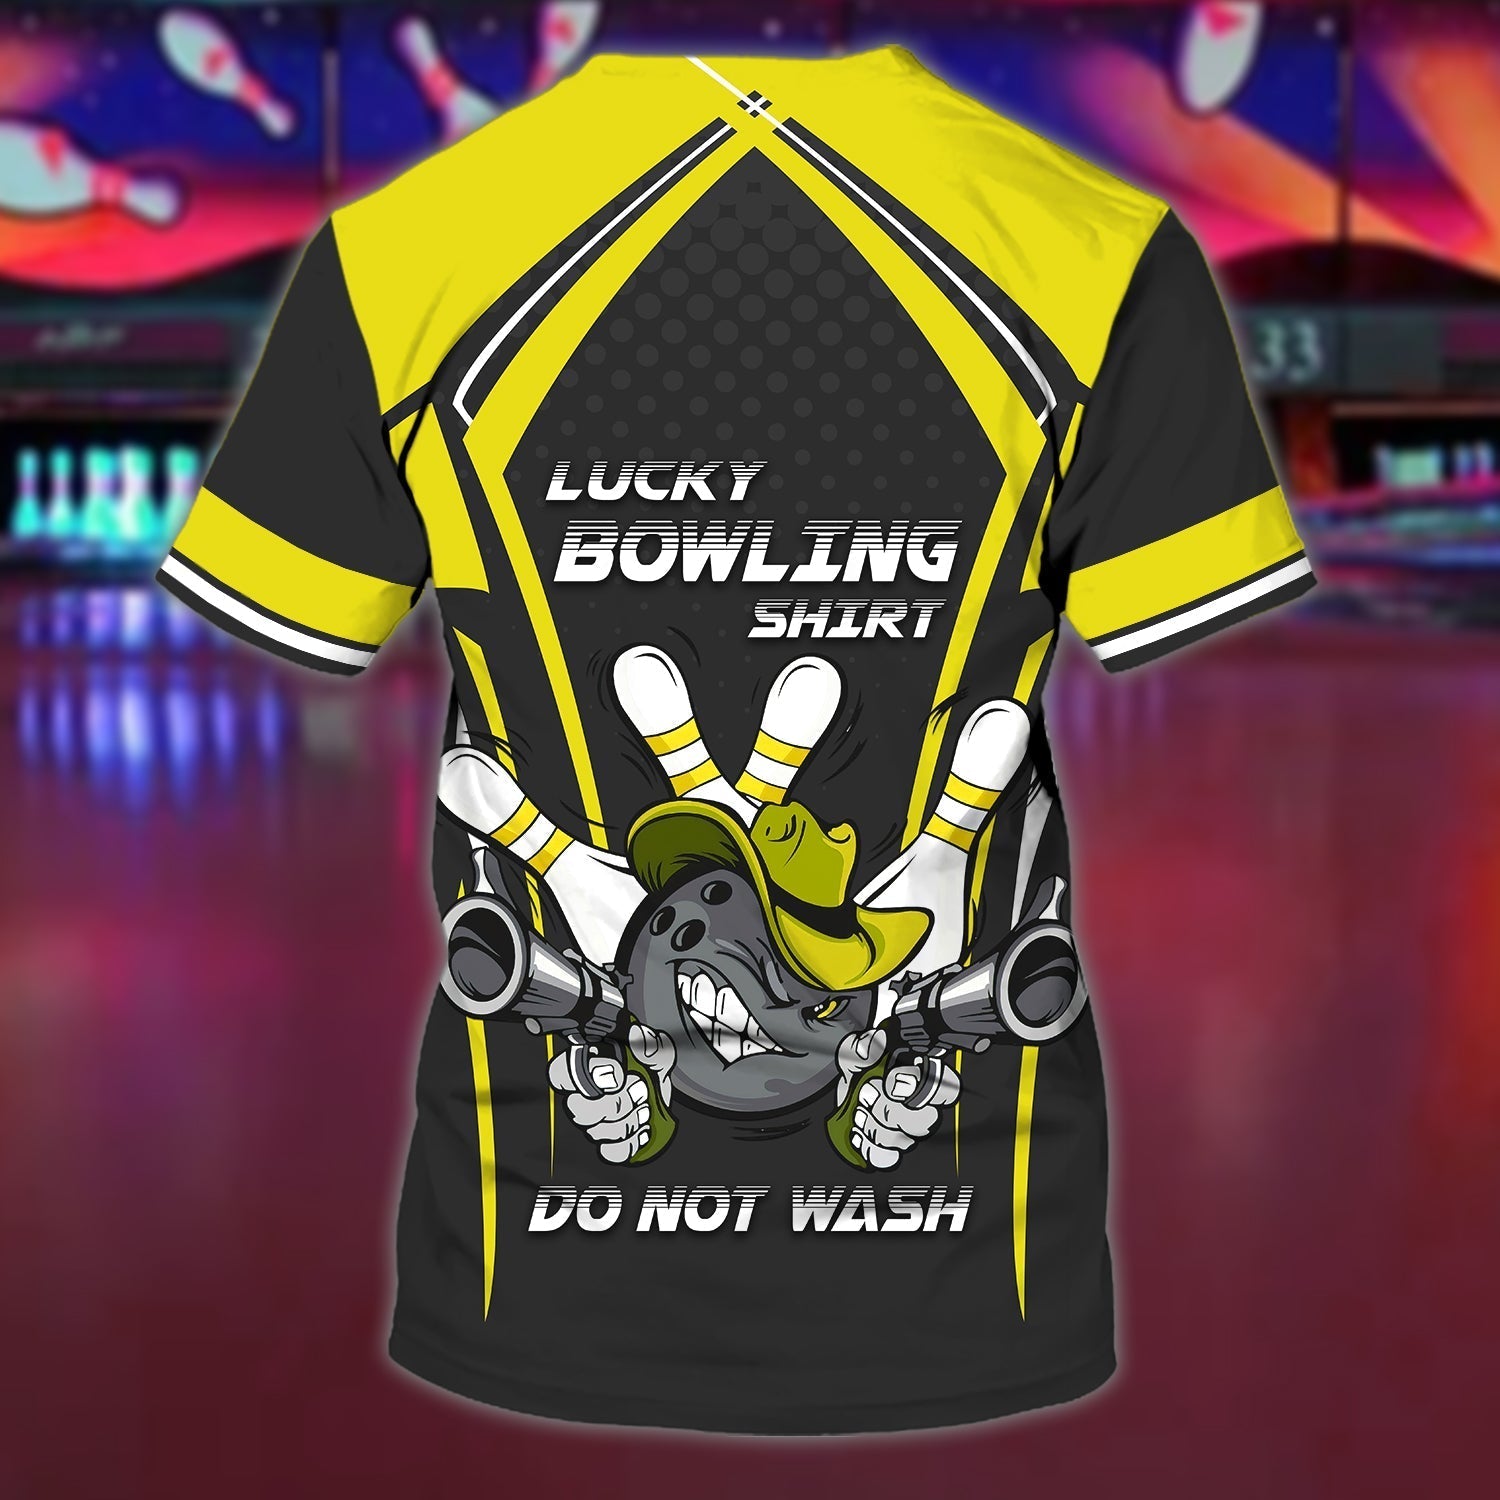 Personalized 3D Full Printed Bowling Shirts/ Lucky Bowling Shirt/ Gift For Bowling Lovers